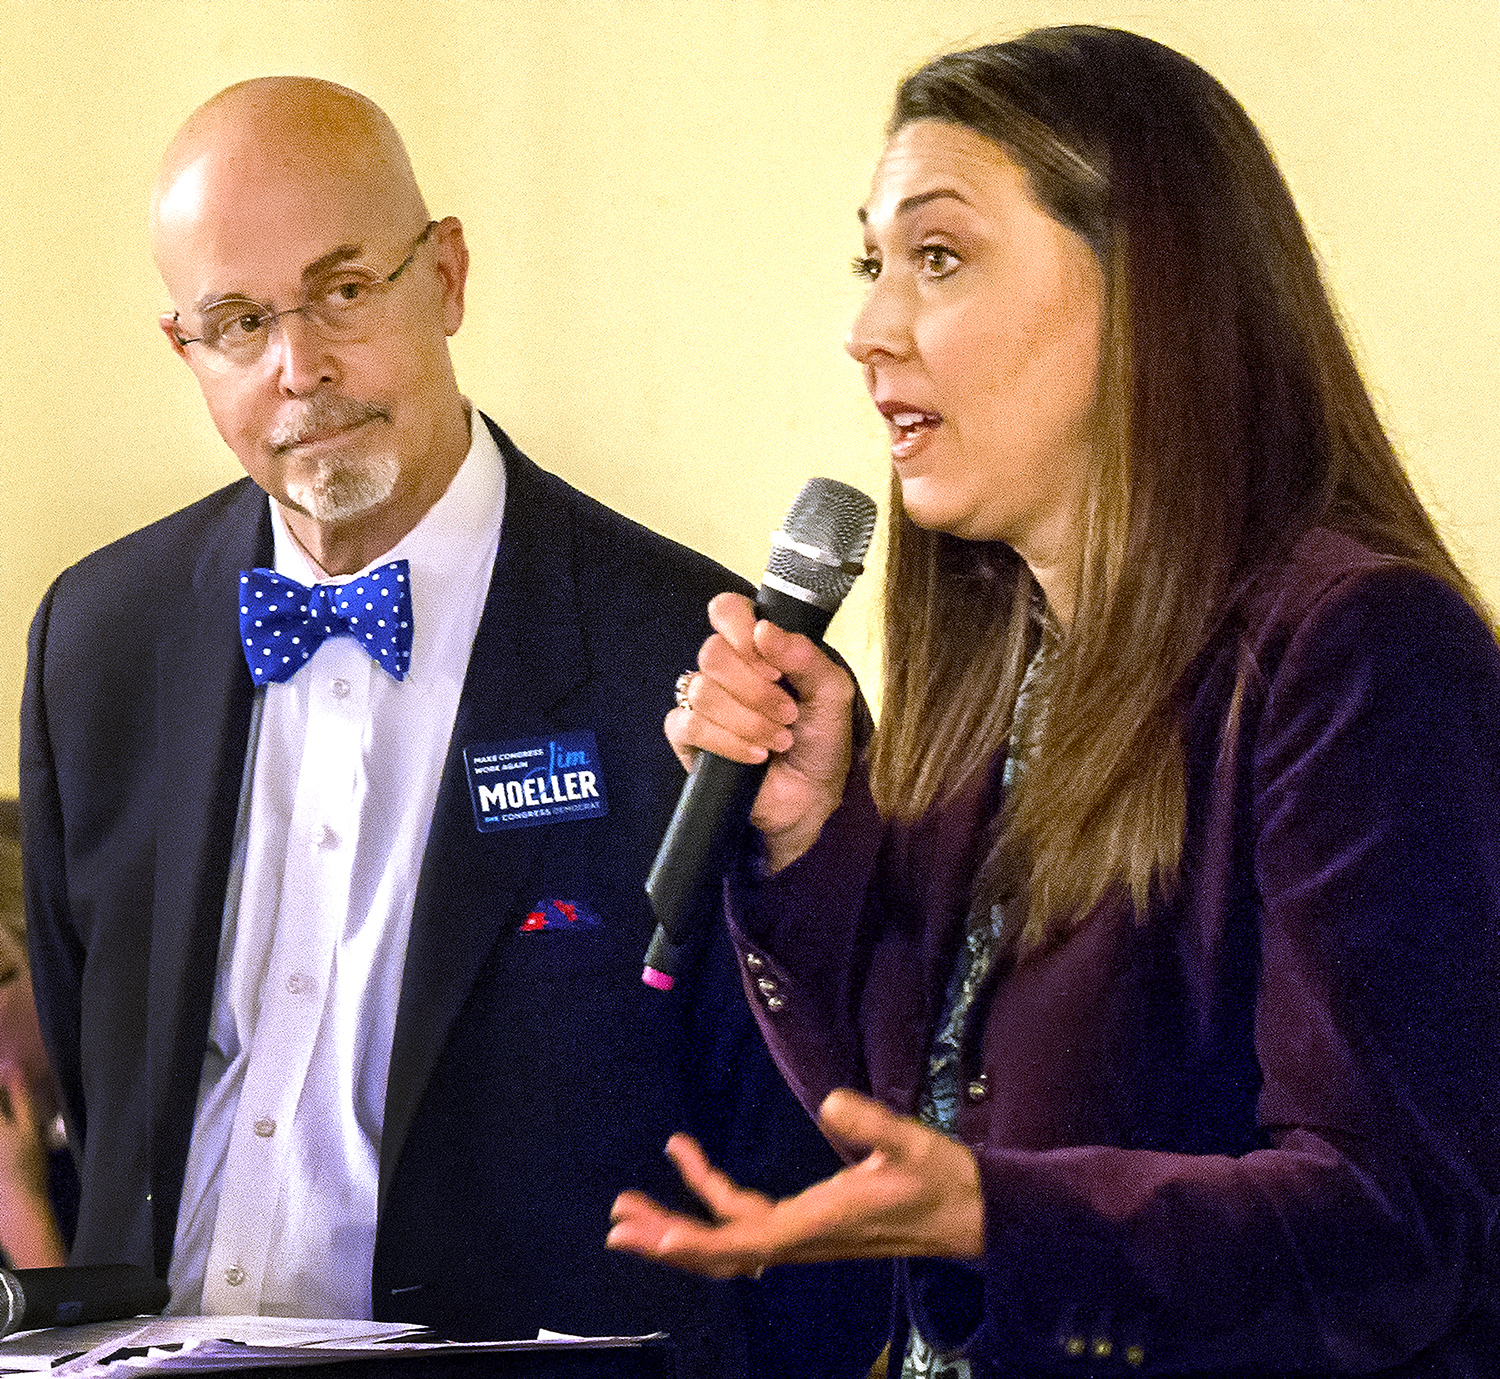 Congresswoman Jaime Herrera Beutler and Democratic challenger state Rep. Jim Moeller of the 49th District squared off in a debate at the Oak Tree Restaurant in Woodland Tuesday afternoon. State Rep. Jim Moeller, D-Vancouver, left, and U.S. Rep. Jaime Herrera Beutler, R-Camas, square off Tuesday afternoon during a debate in Woodland. Moeller is challenging Herrera Beutler for her 3rd Congressional District seat. (Roger Werth/The Daily News)